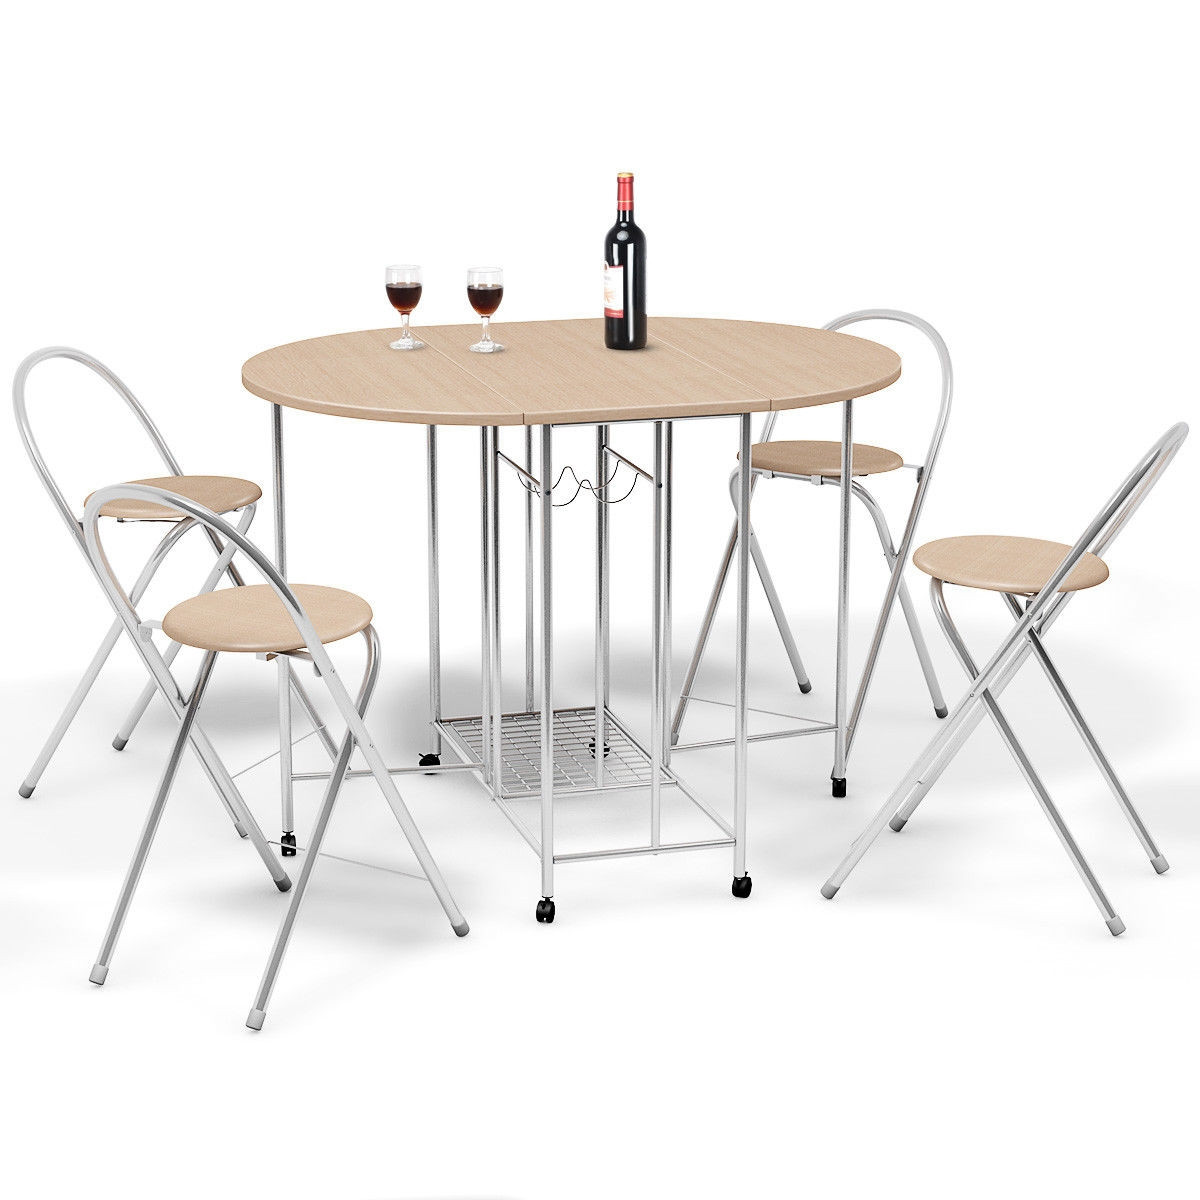 5 Pcs Foldable Dining Set 1 Table and 4 Chairs